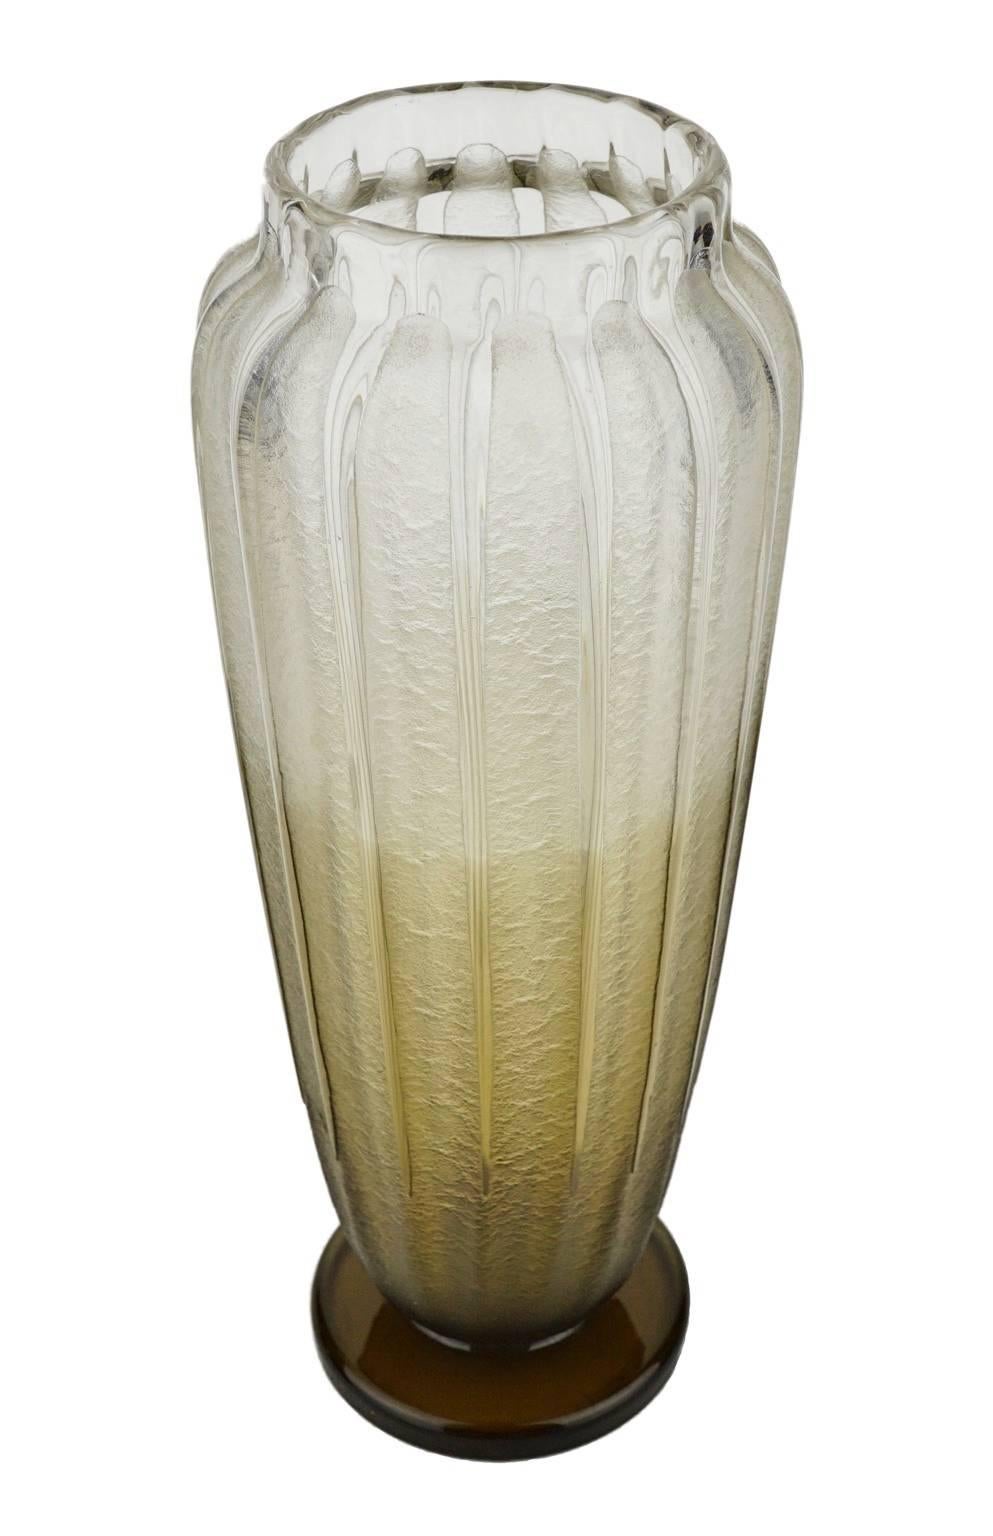 French Art Deco vase signed Schneider on a piedouche from the collection “A côtes”. Smoked glass with frosted effect through acid.

From 1919 on, Charles Schneider kept strictly separated the two brands of his company. The more artistic, varied and